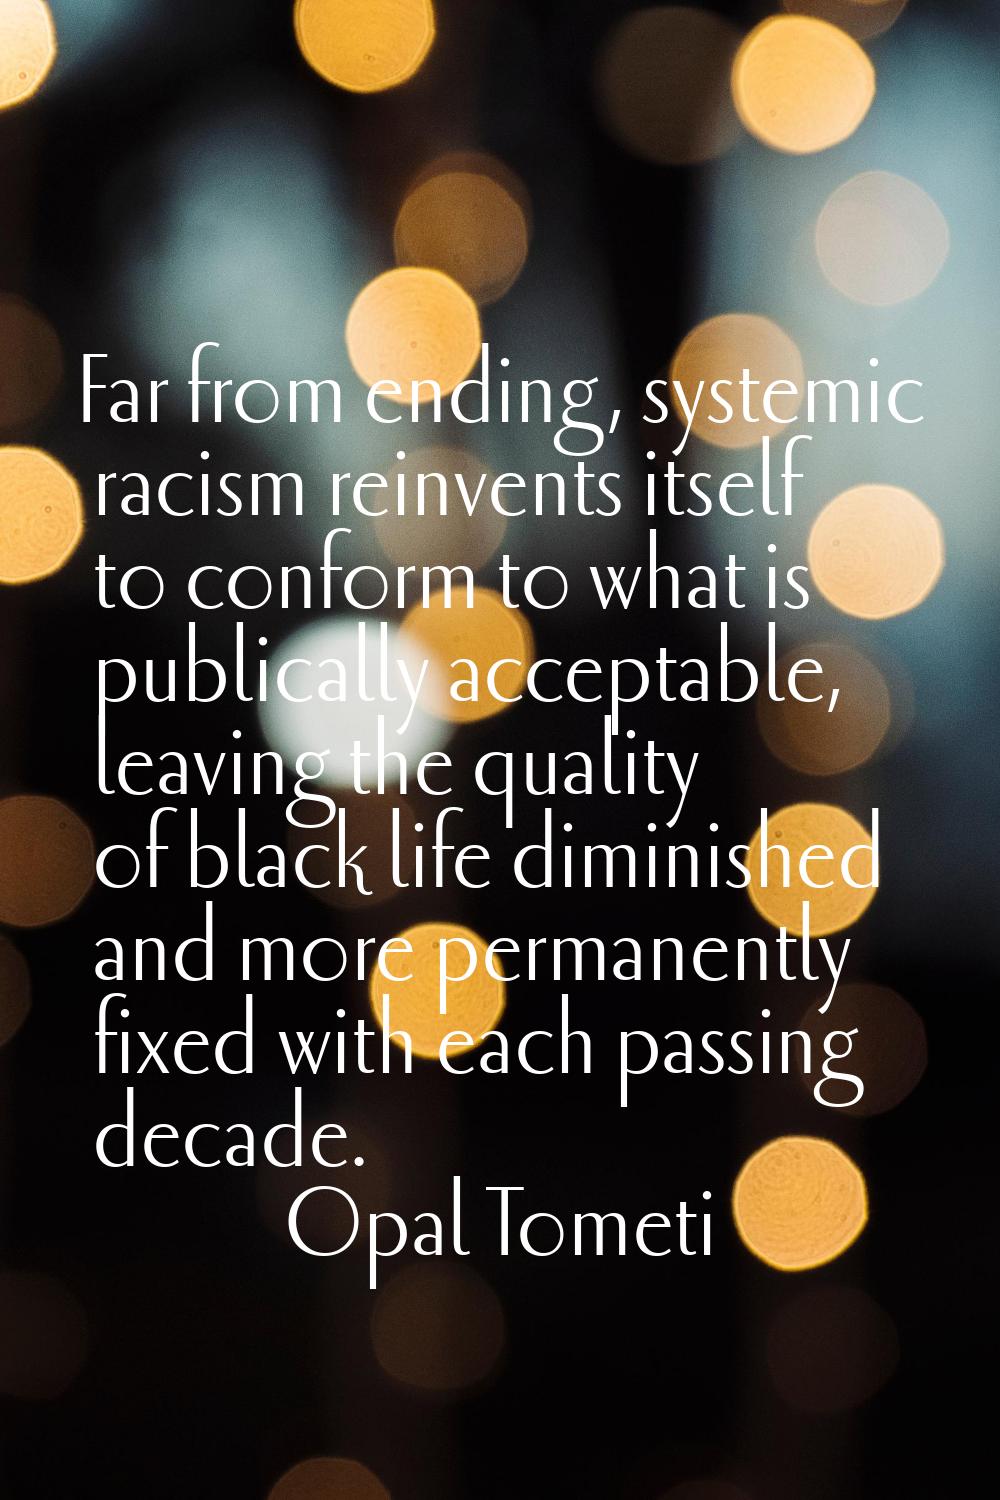 Far from ending, systemic racism reinvents itself to conform to what is publically acceptable, leav